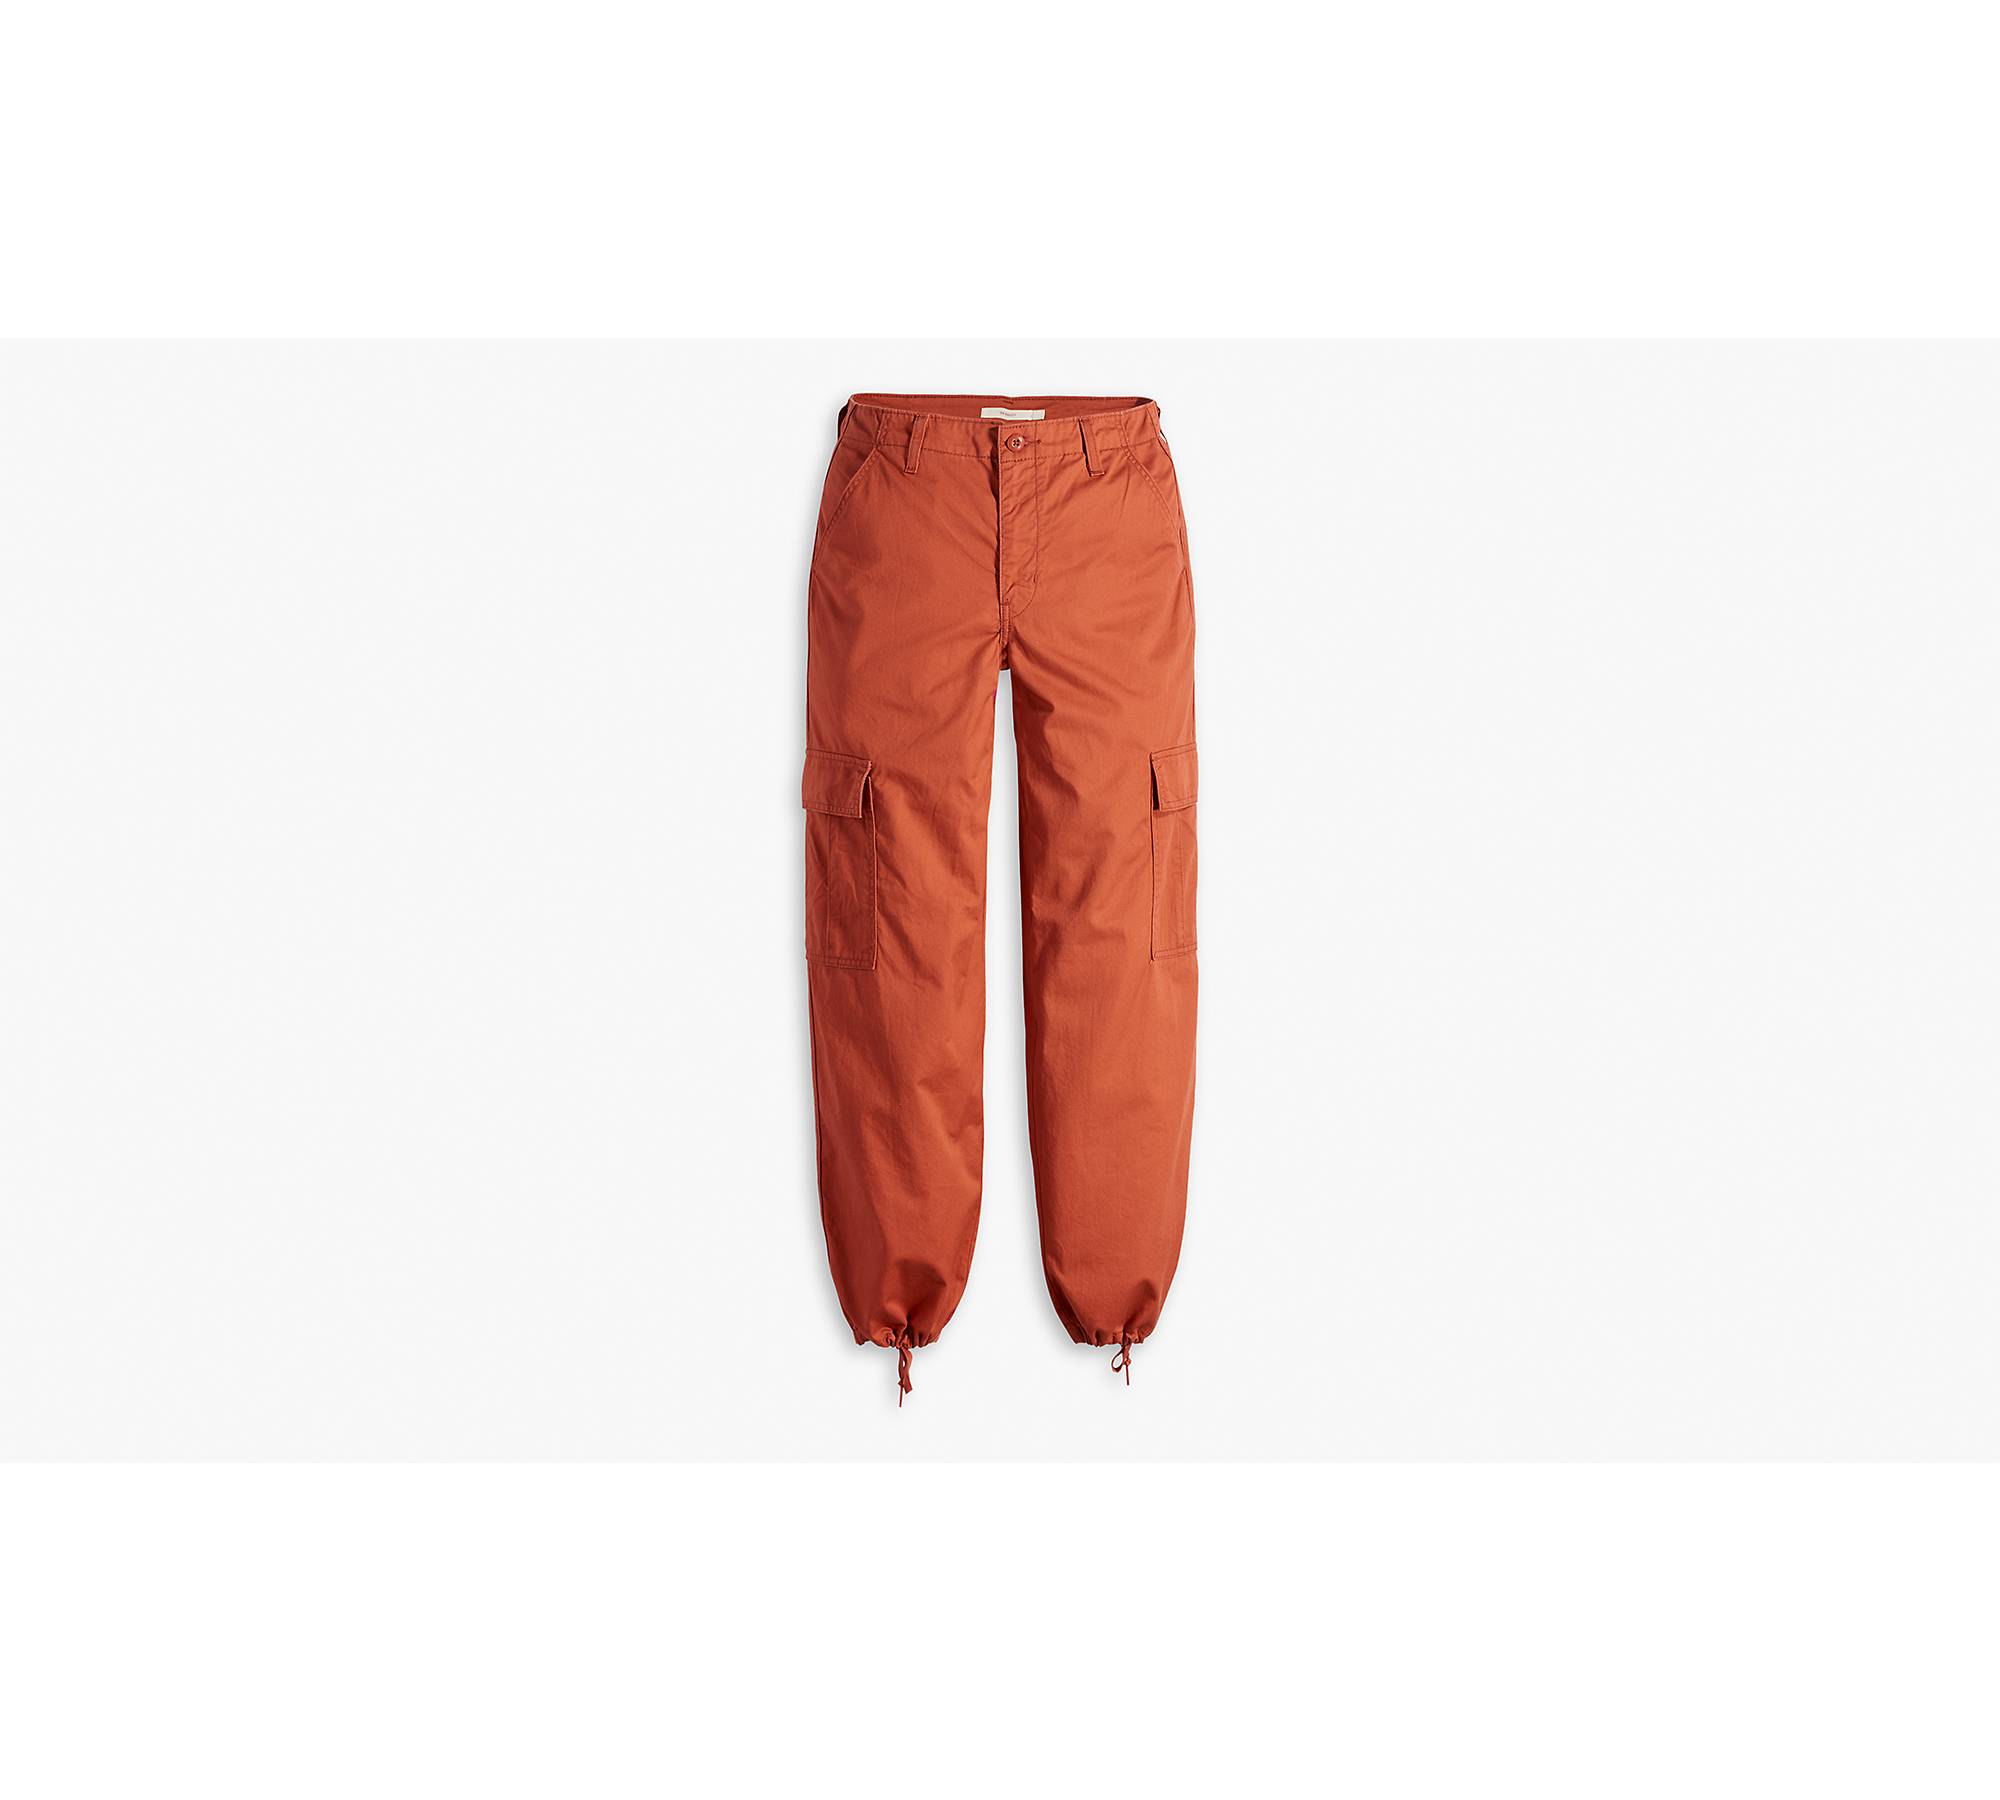 18 Pairs Of '90s-Inspired Baggy Trousers Available Now